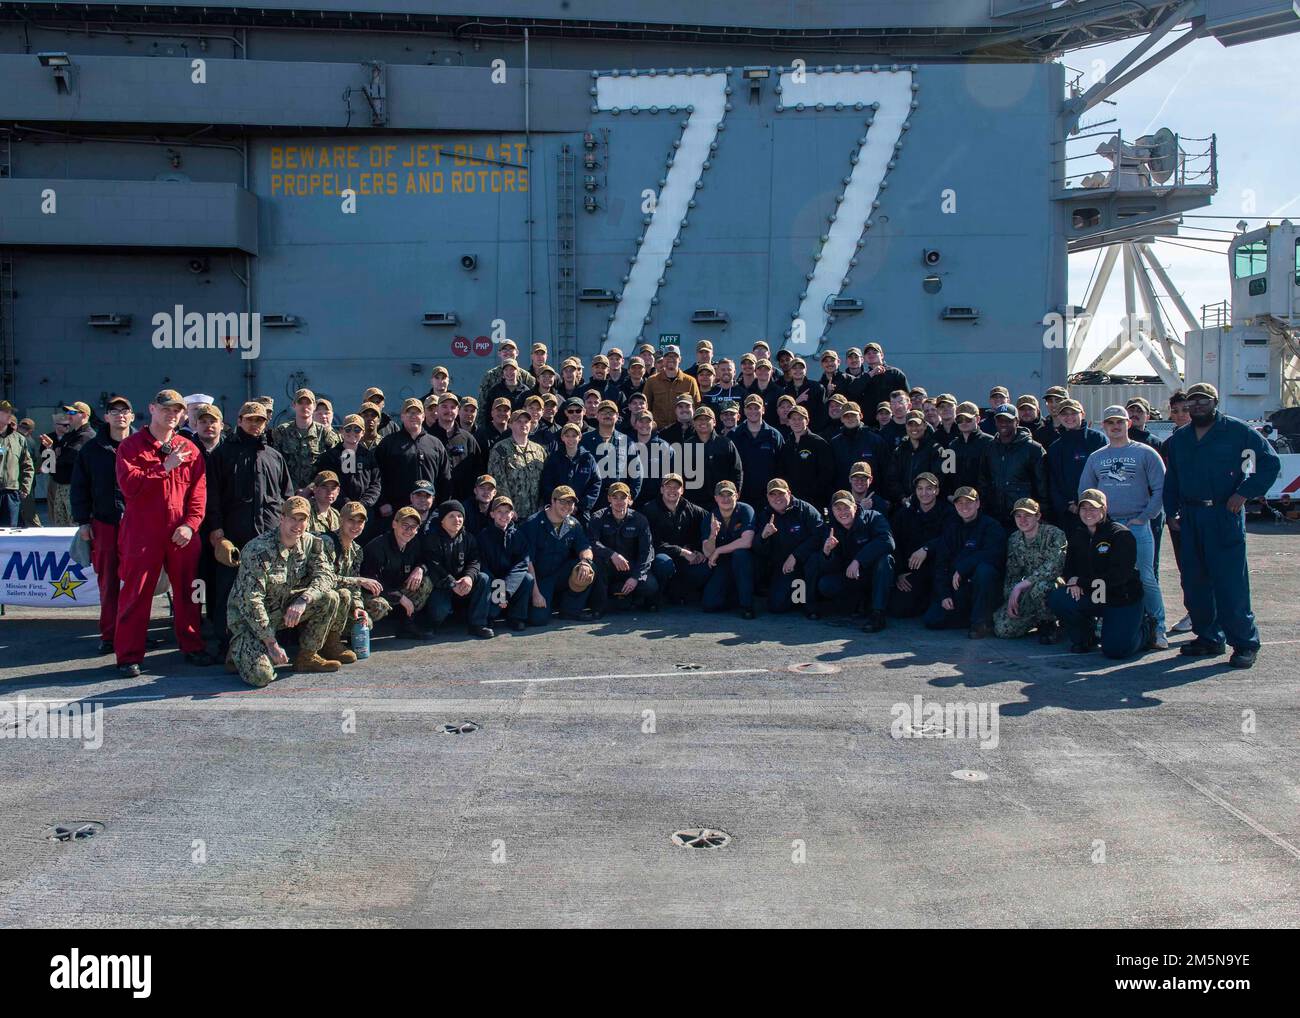 220329-N-OL632-1177 NAVAL STATION NORFOLK (March 29, 2022) NASCAR Hall of Famer Dale Earnhardt Jr. and NASCAR Xfinity Series driver Justin Allgaier take a group photo with Sailors assigned to the aircraft carrier USS George H.W. Bush (CVN 77) during a visit to the ship, March 29, 2022. George H.W. Bush provides the national command authority flexible, tailorable war fighting capability as the flagship of the carrier strike group which maintains maritime stability and security in order to ensure access, deter aggression and defend U.S., allied and partner interests. Stock Photo